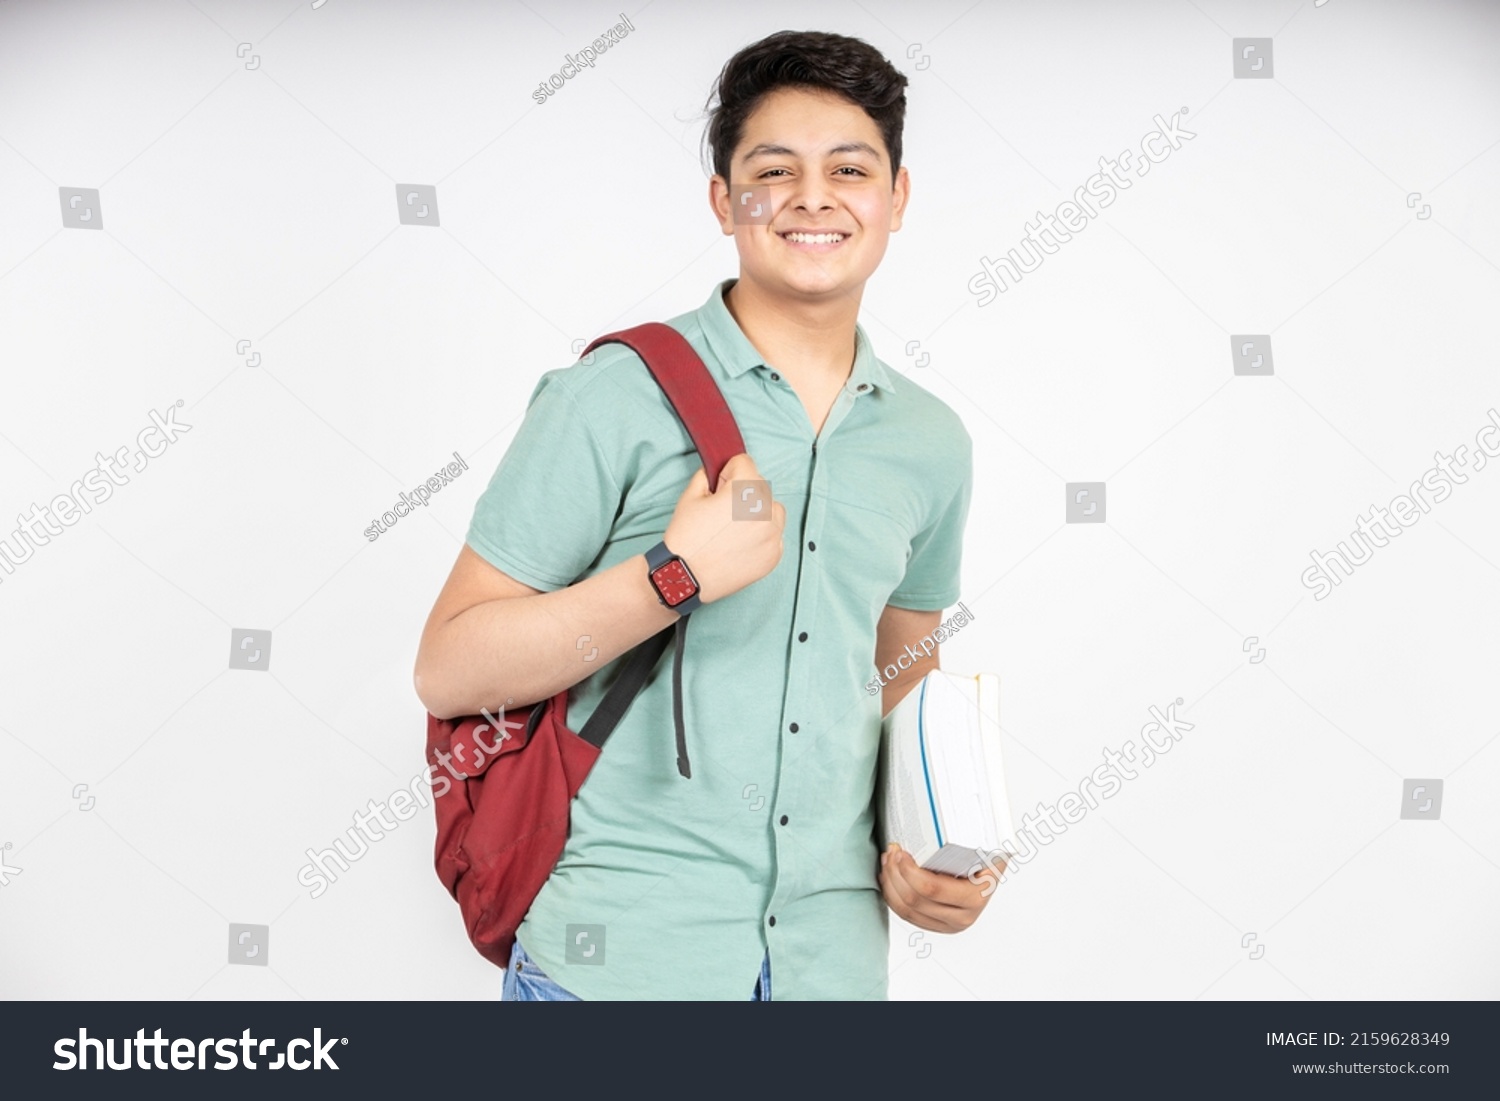 Portrait of happy indian teenager college or school boy with backpack holding books, isolated on white background. Smiling young asian male kid looking at camera. #2159628349